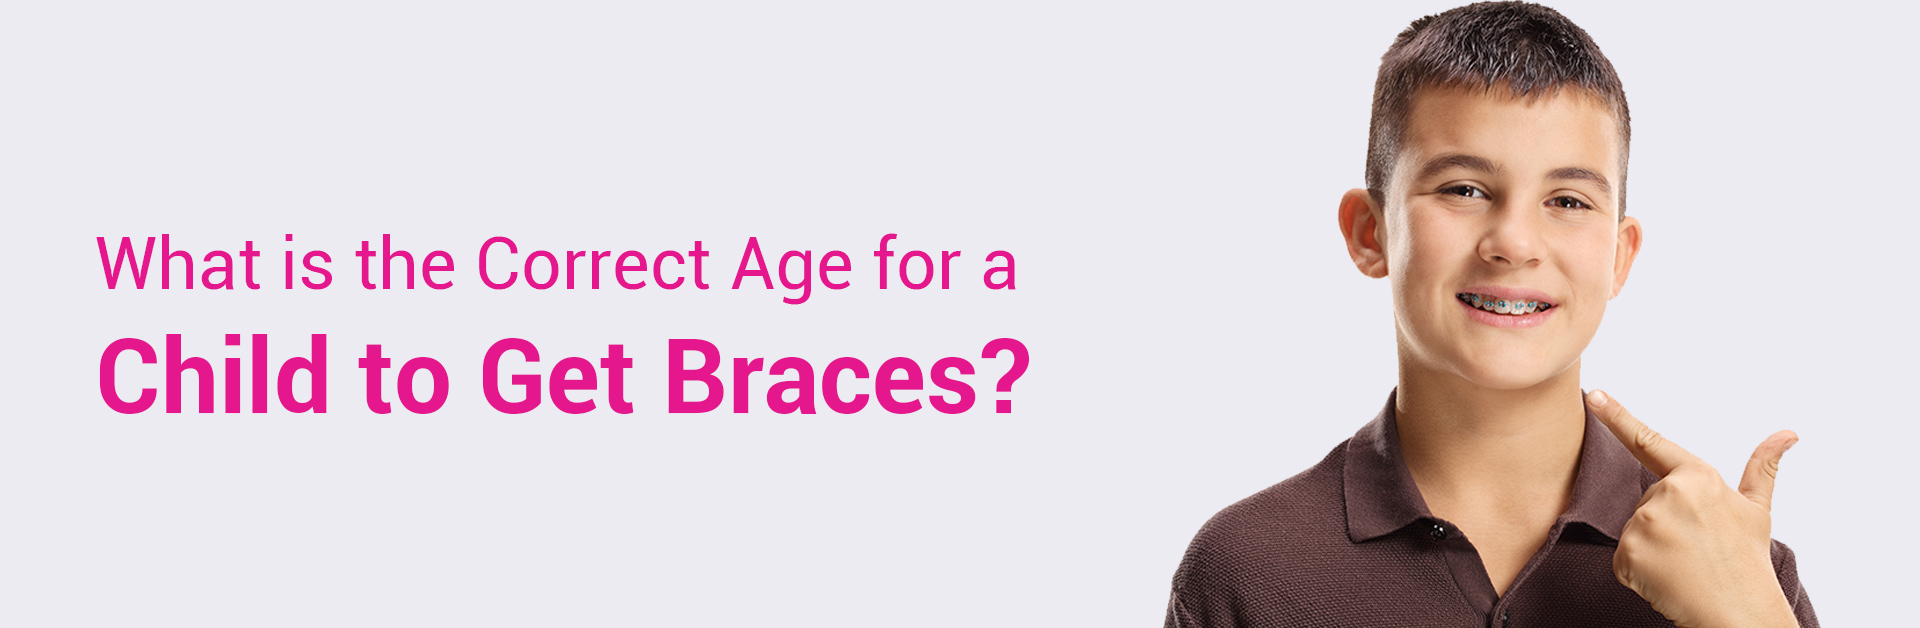 WHAT IS THE CORRECT AGE FOR A CHILD TO GET BRACES?